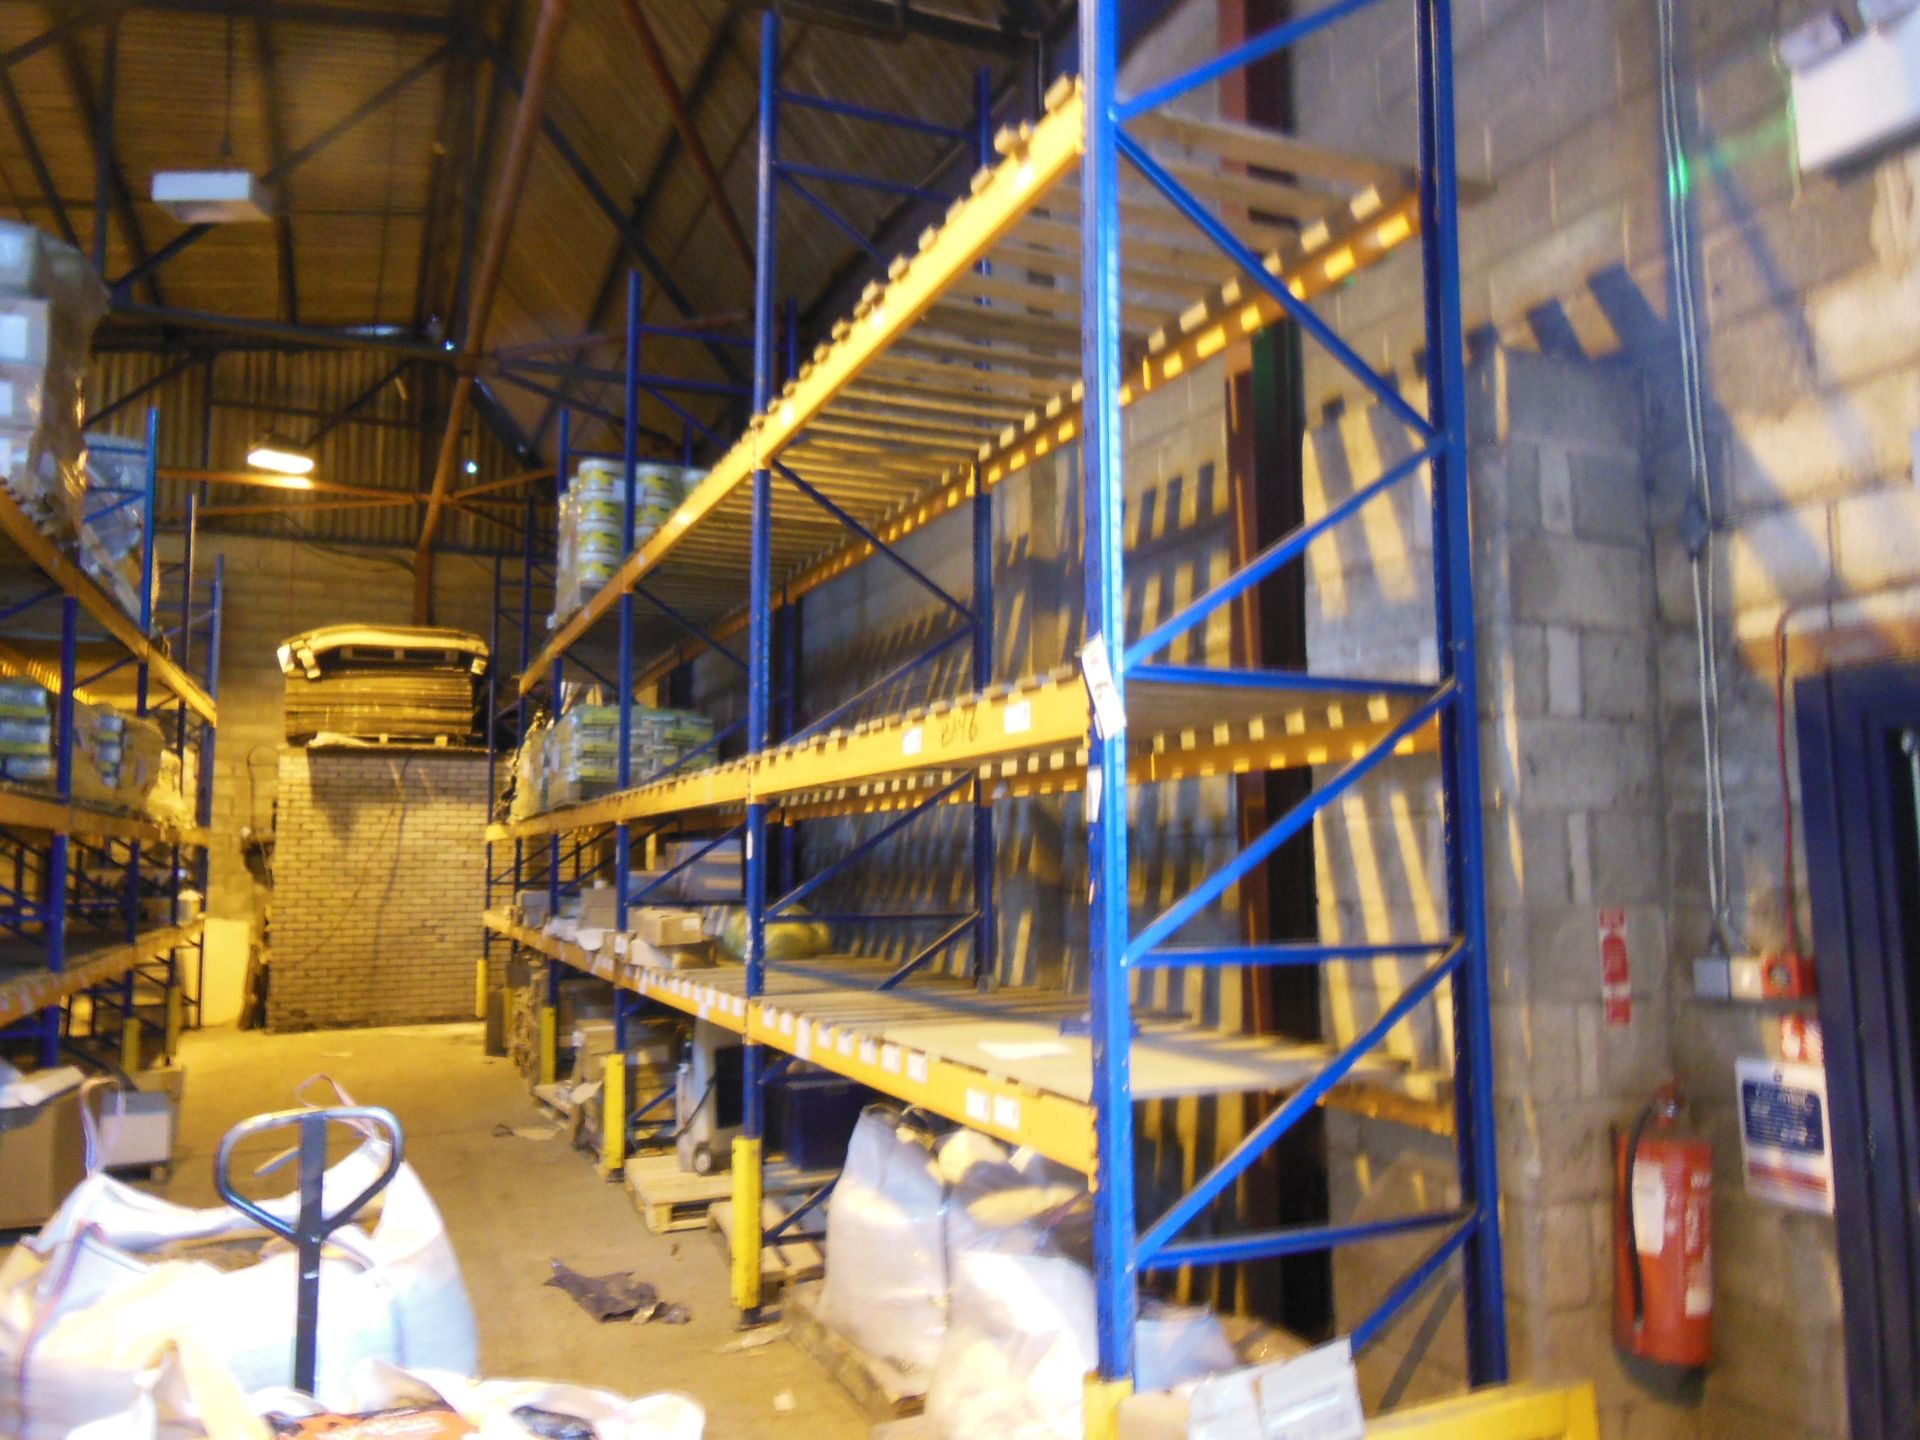 Five Bays of Three Tier Boltless Pallet Rack, and two single bay multi-tier pallet racks